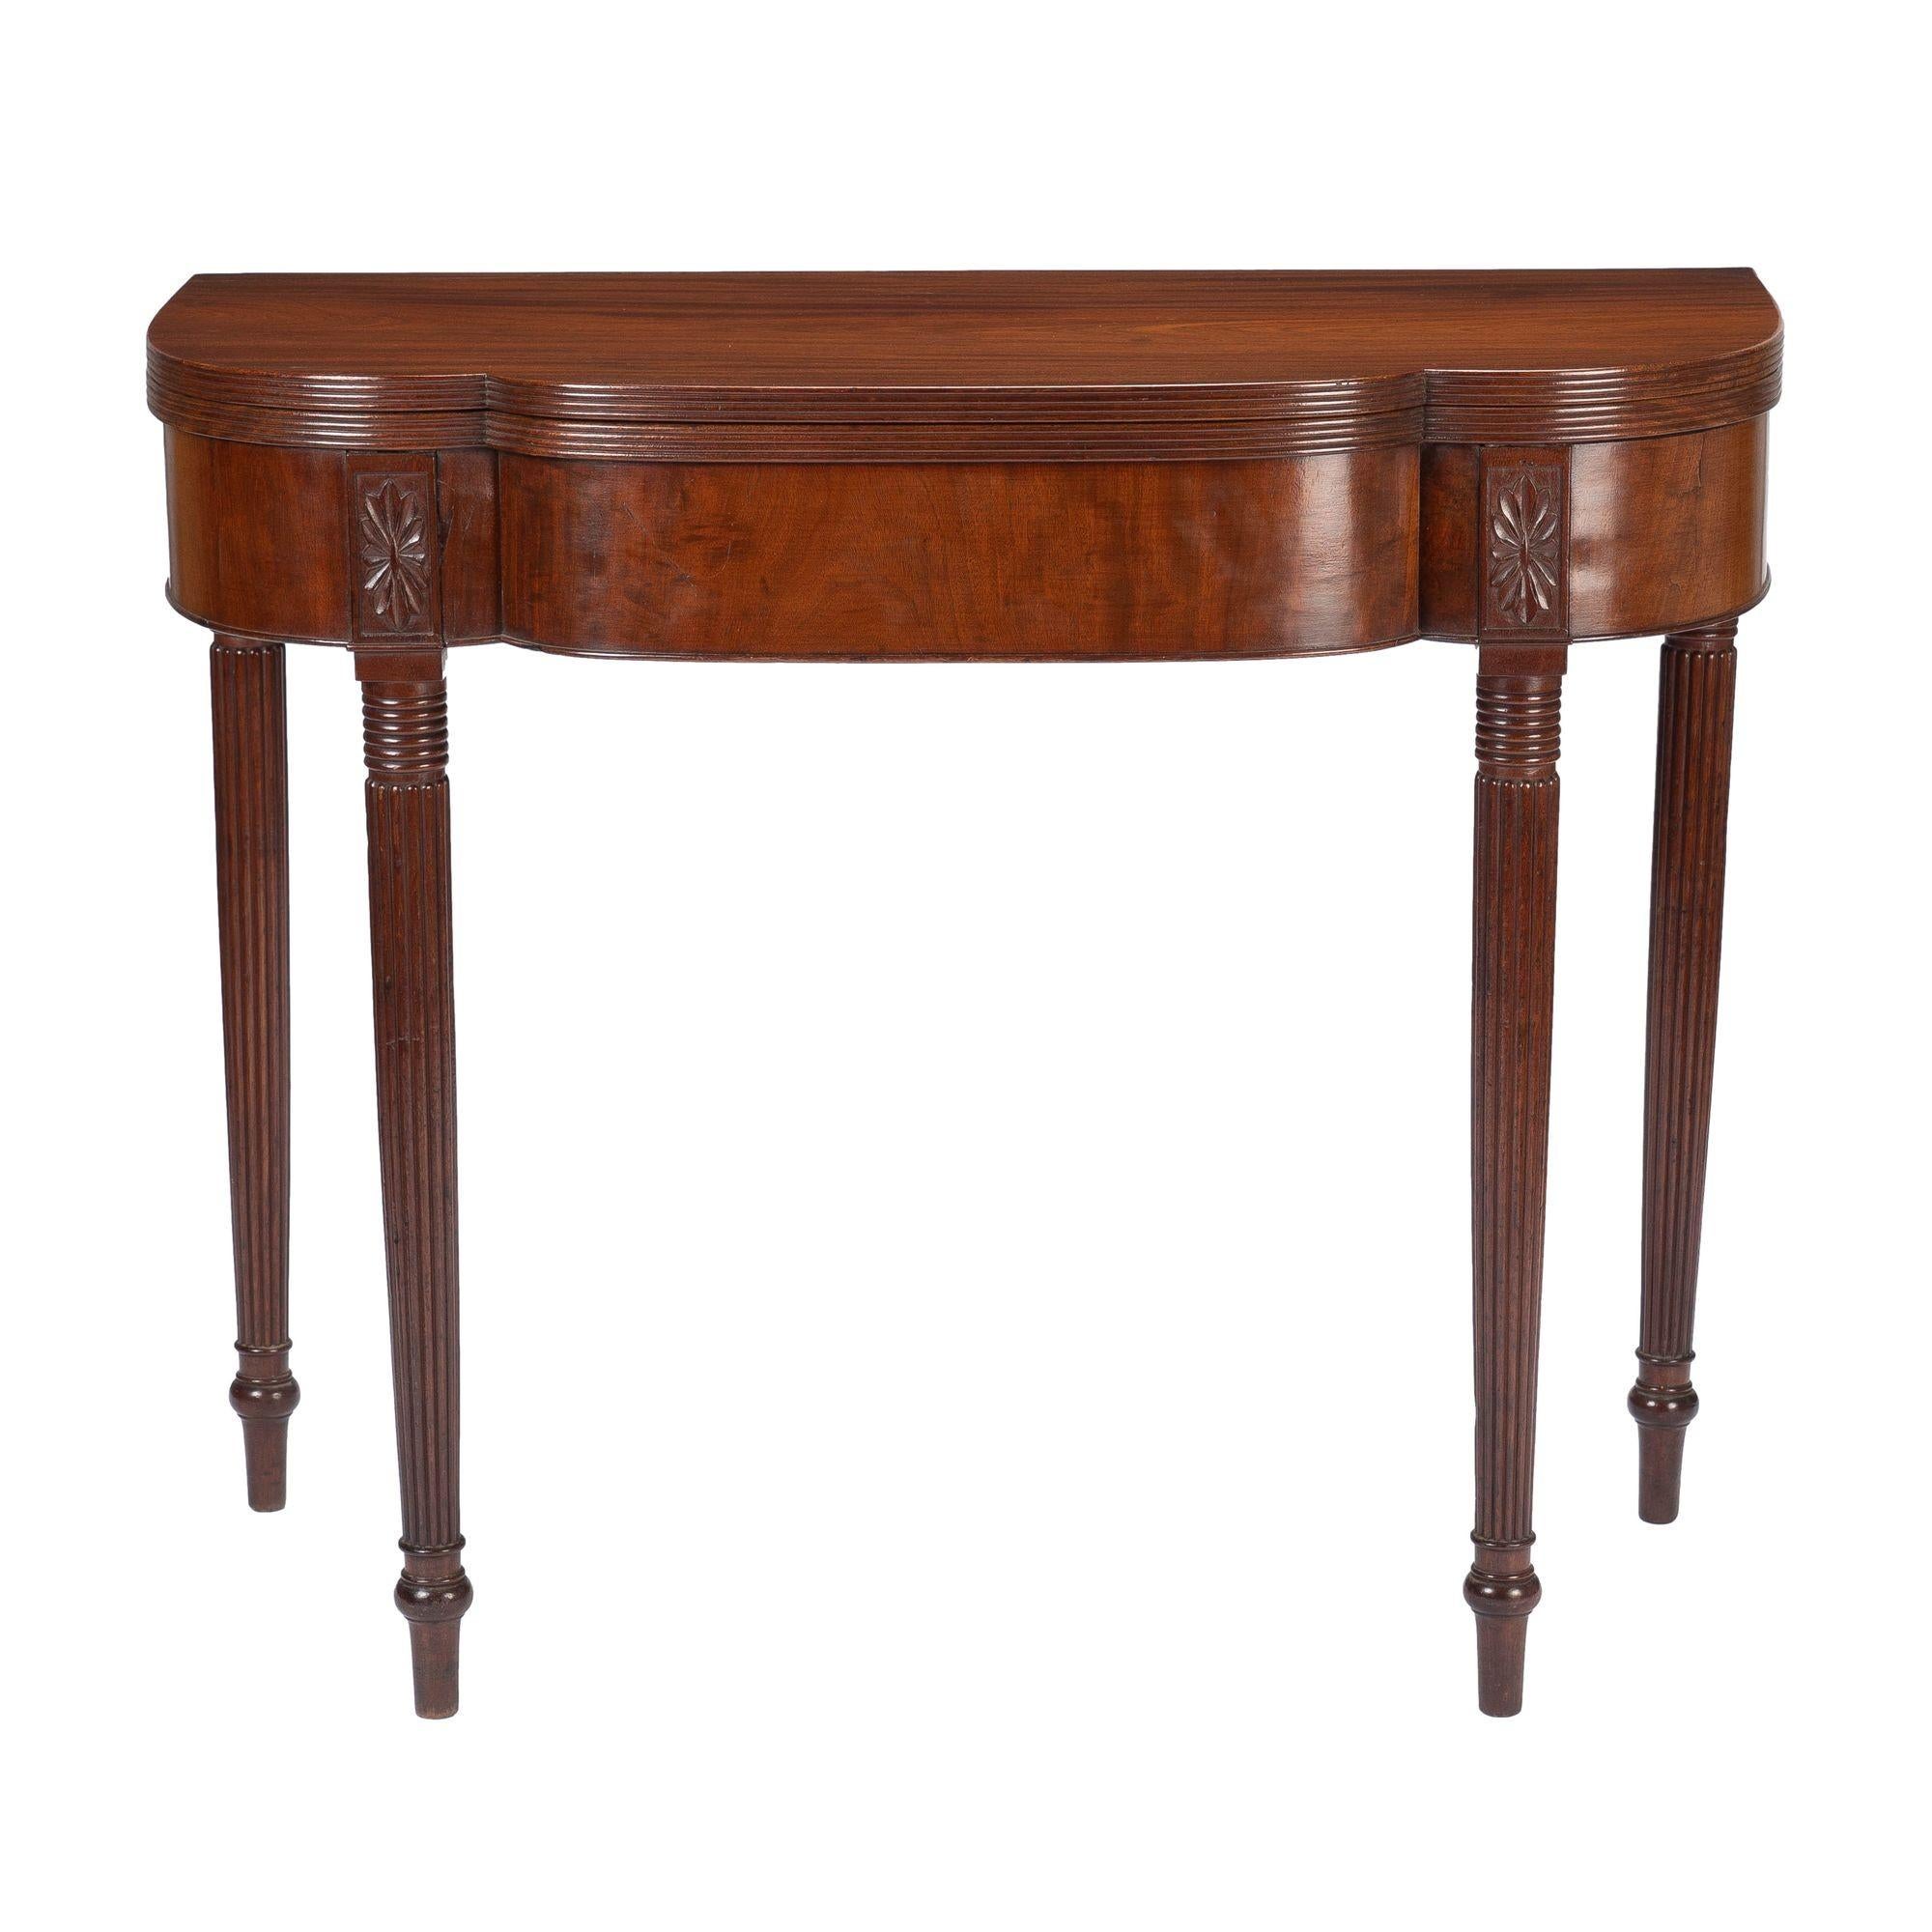 American Sheraton dimpled corner flip top game table with gated swing leg. The edges of the top are finely reeded and mounted to a conforming figured cherry veneered apron. The apron is punctuated by carved leg dies continuing into tapered, turned,